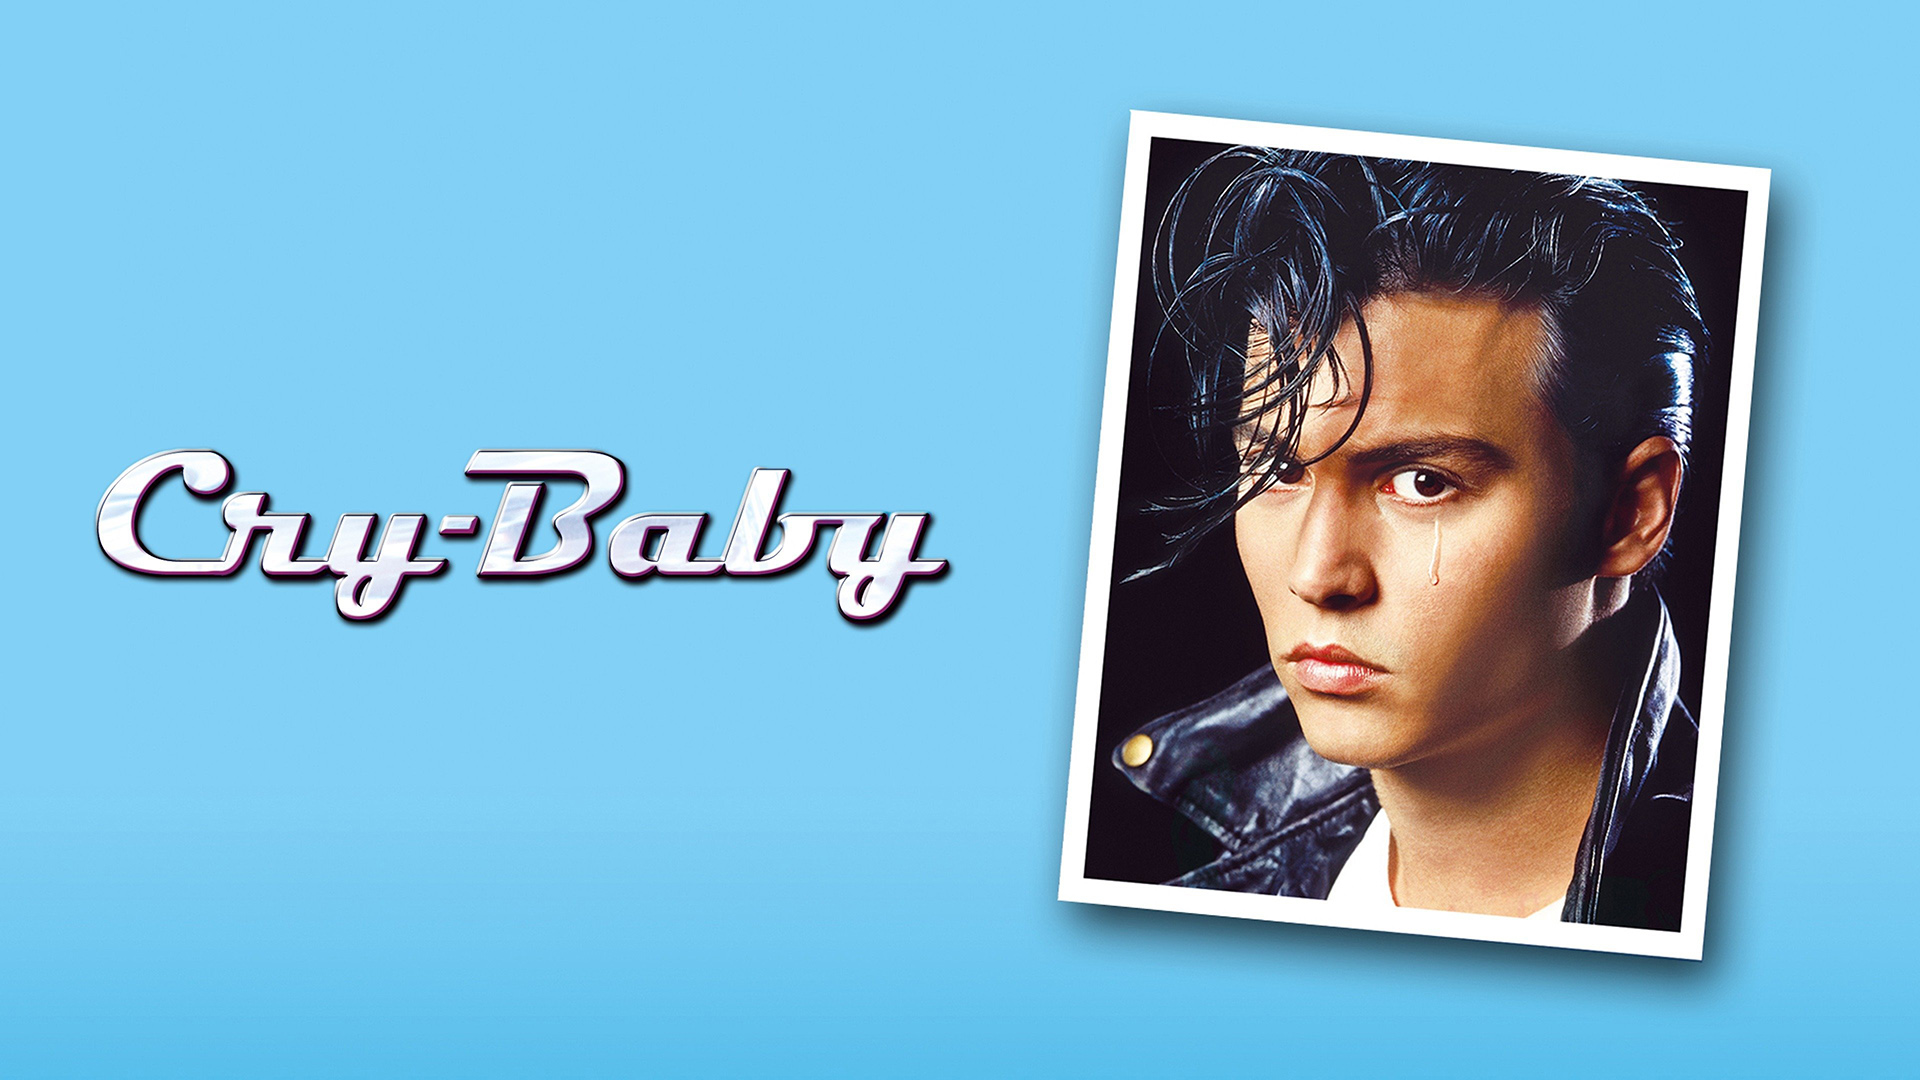 Cry-baby